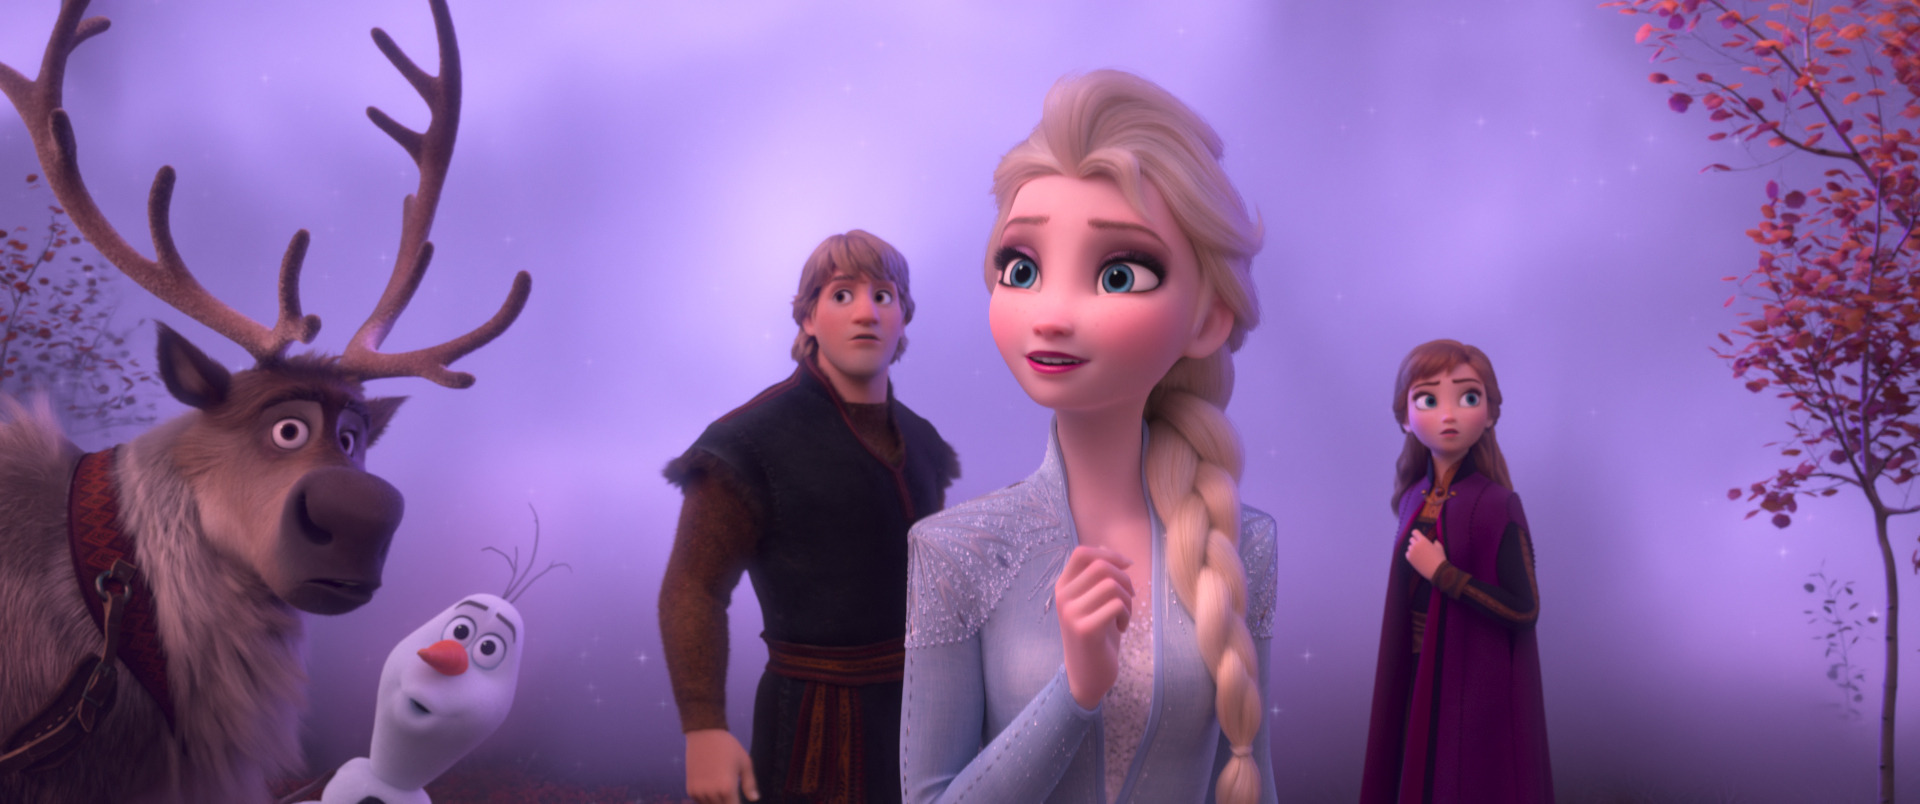 36-facts-about-the-movie-frozen-ii